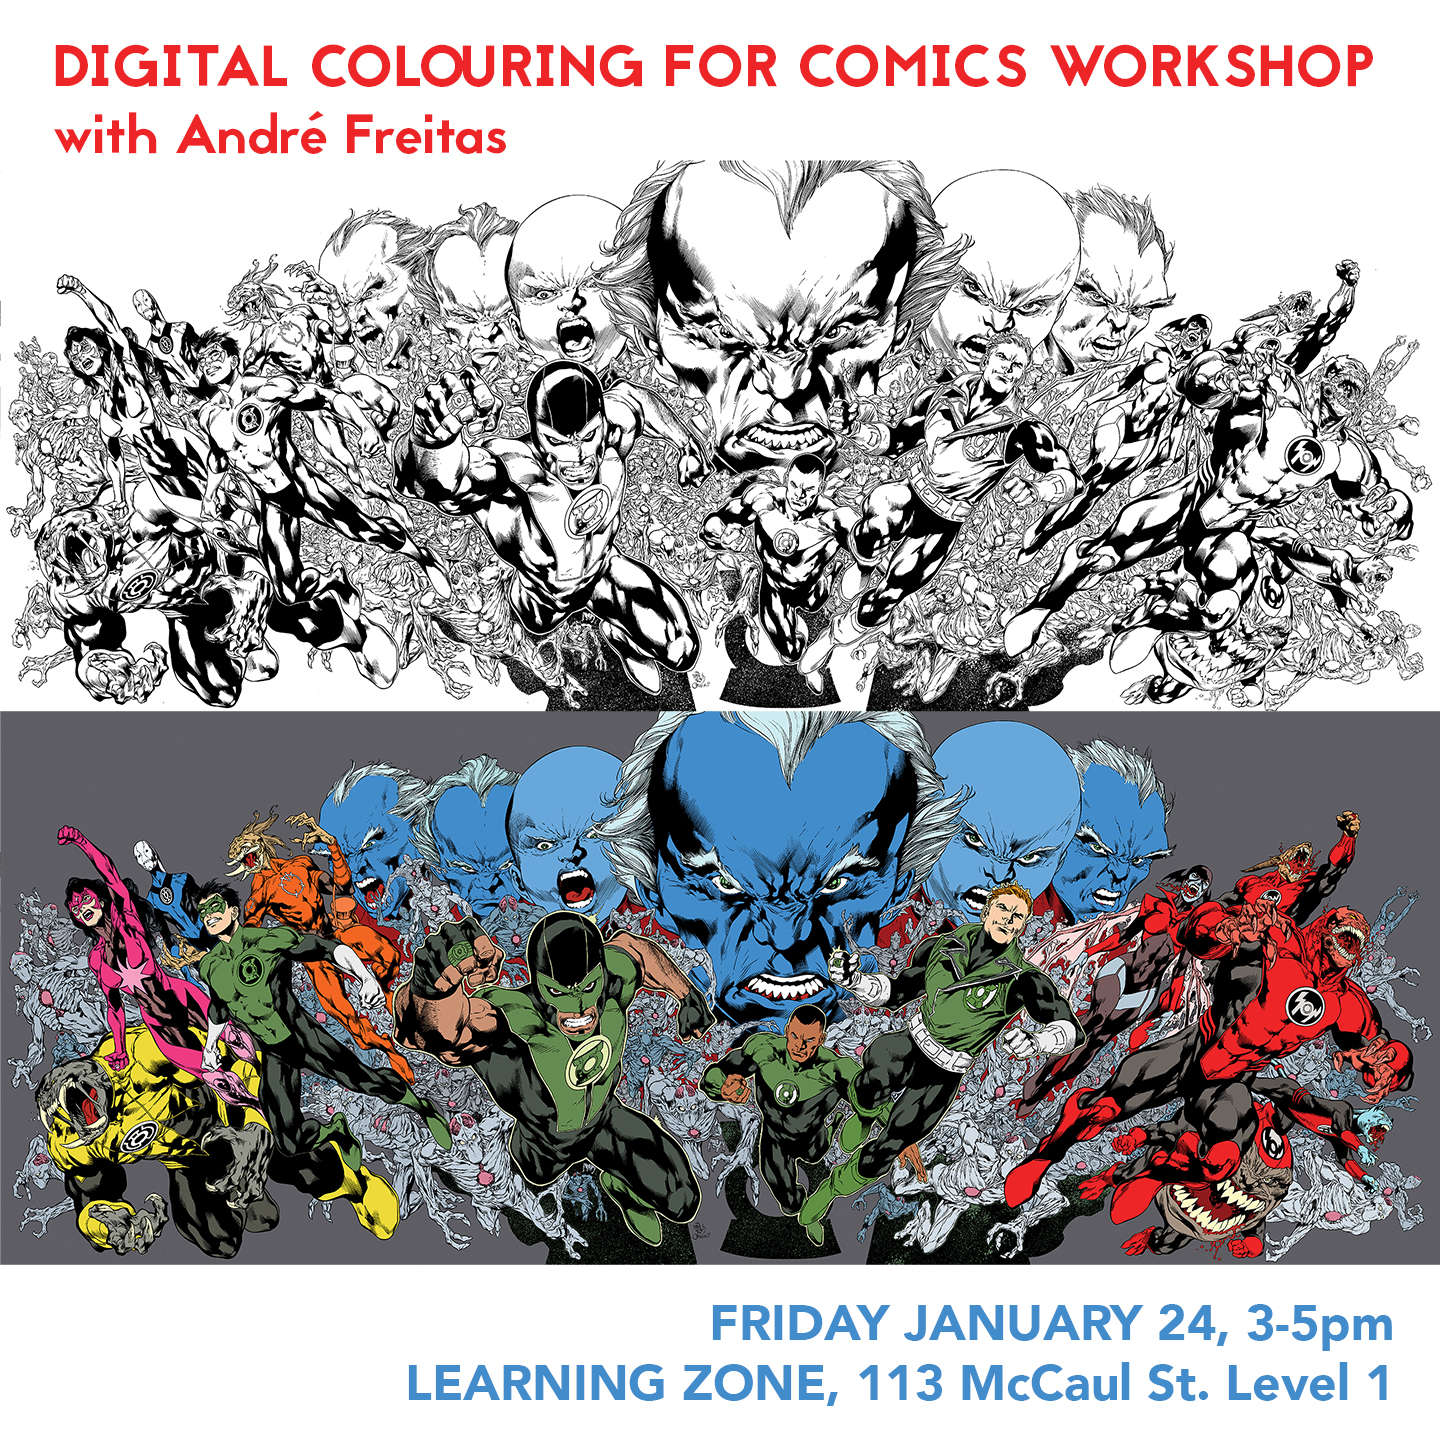 Two drawings of superhero characters bursting from the center, one black and white line work, one with full colour